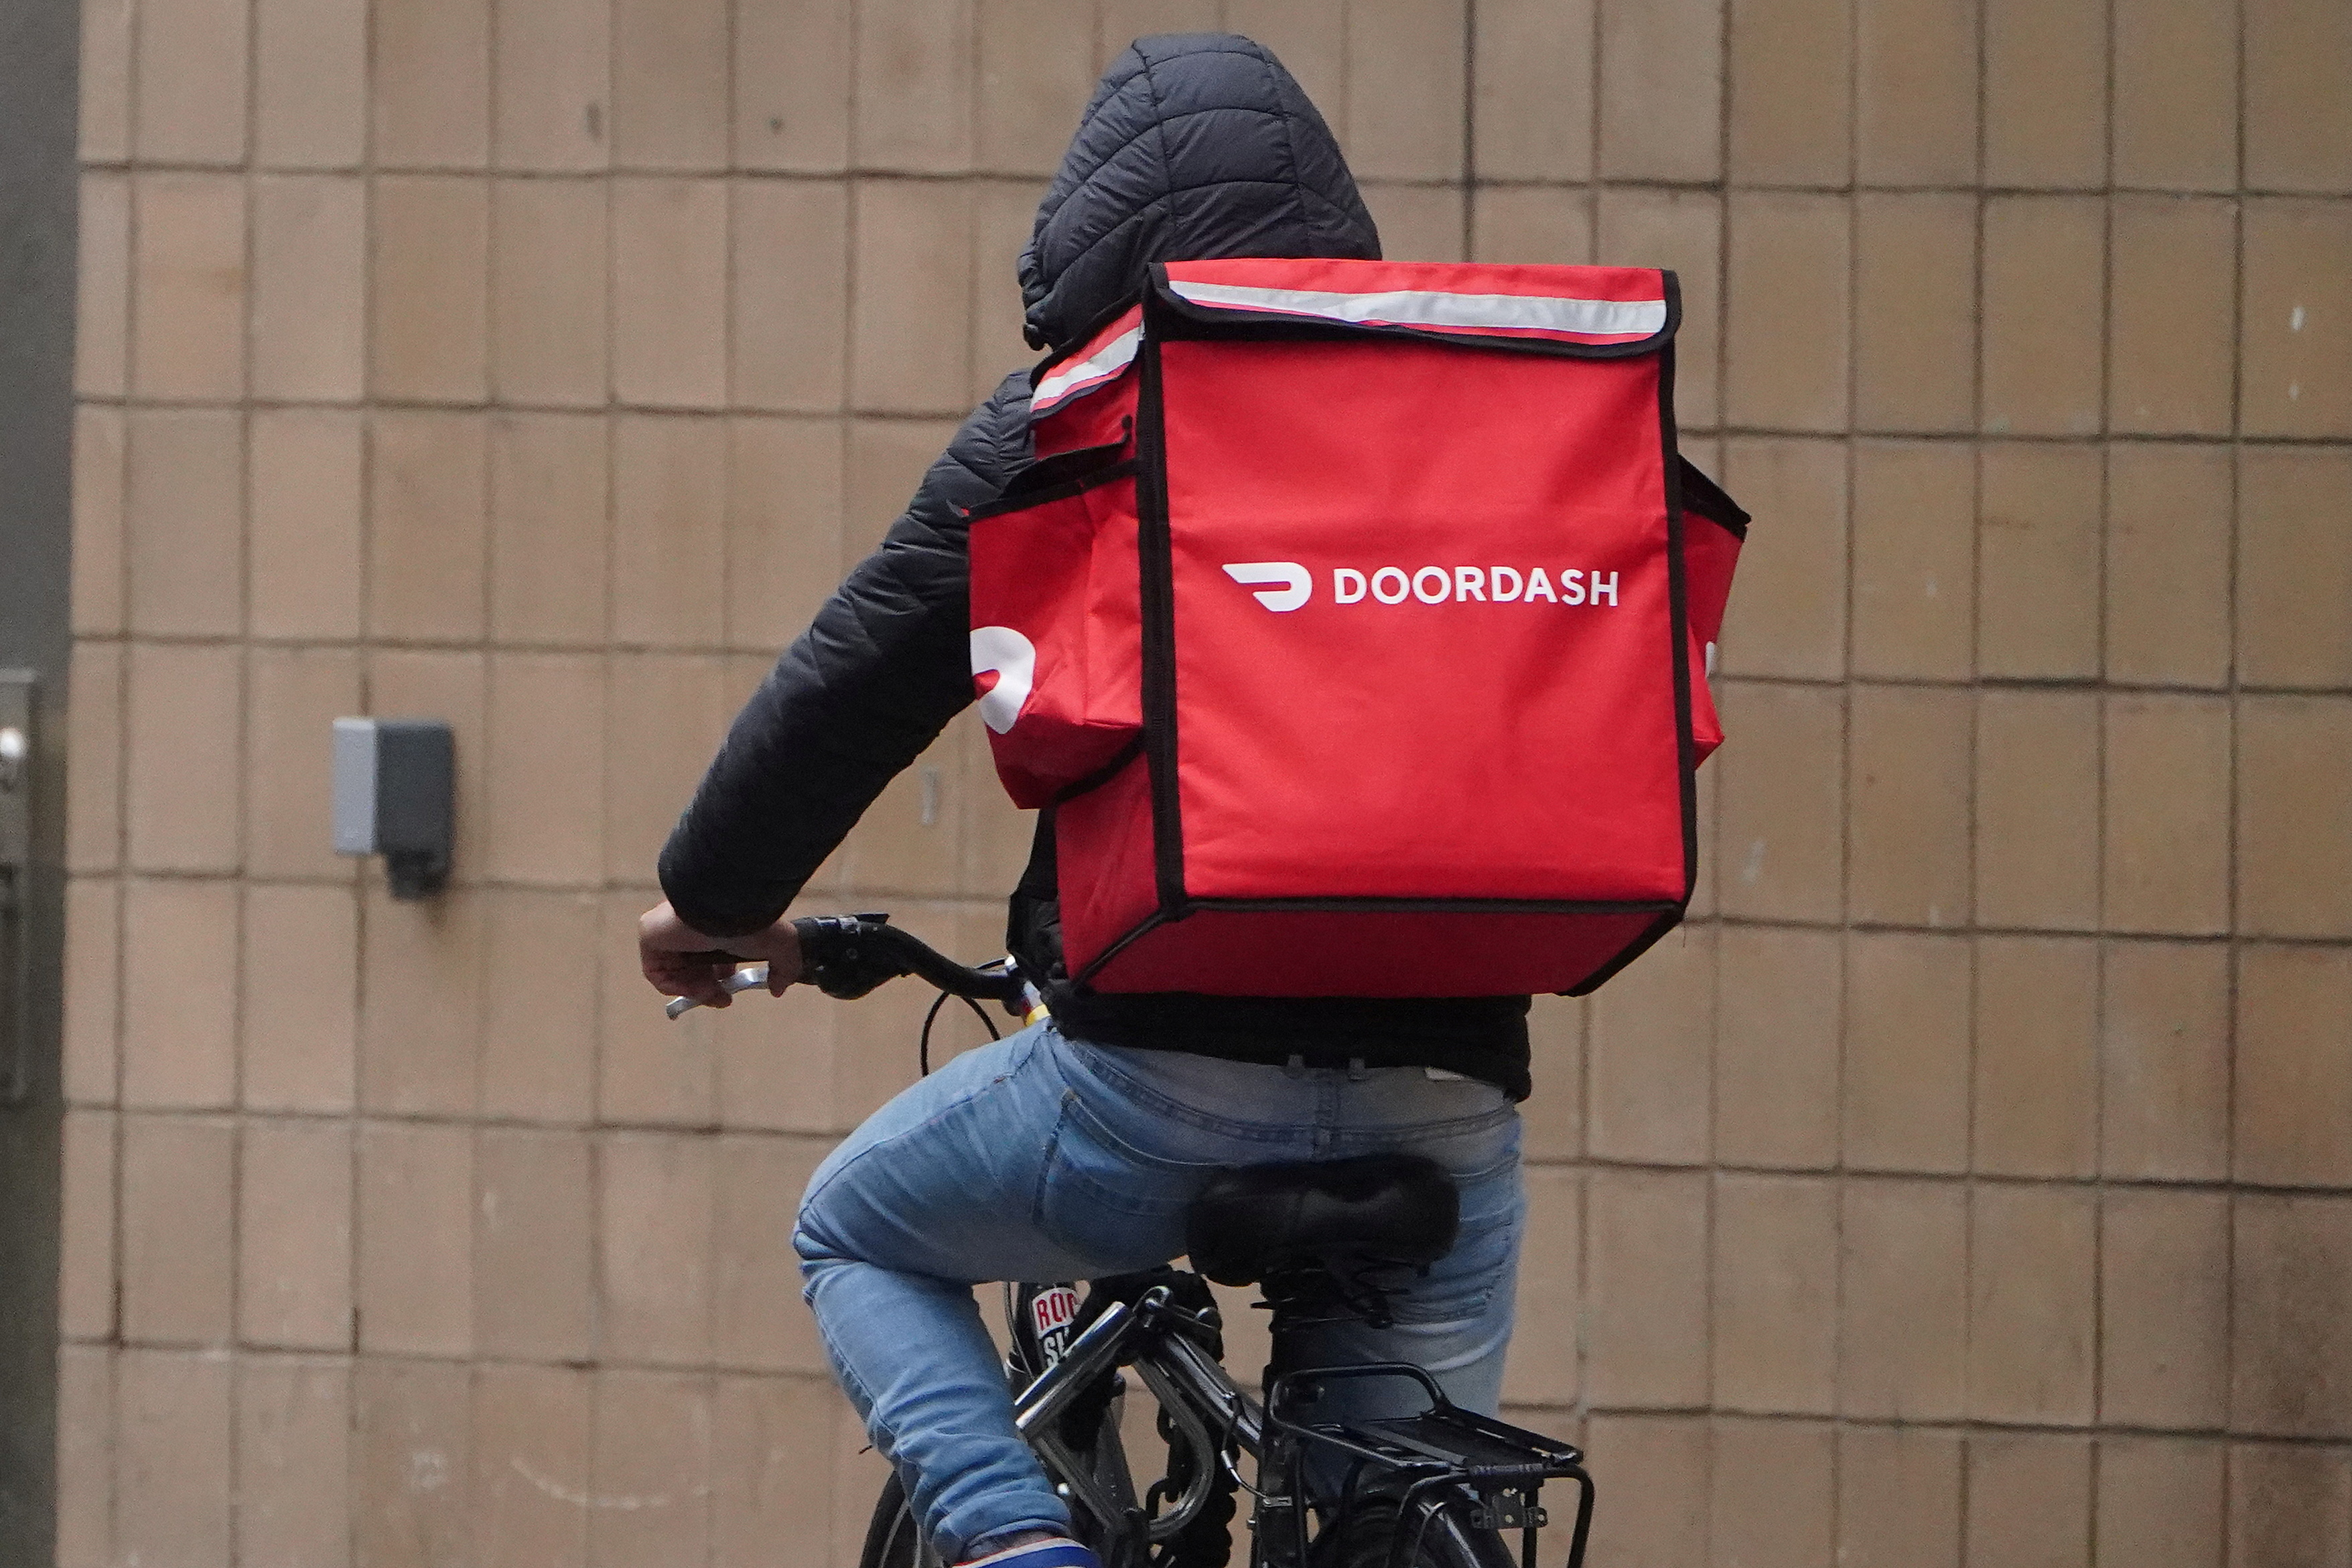 FILE PHOTO: A delivery person for Doordash rides his bike in the rain during the coronavirus disease (COVID-19) pandemic in the Manhattan borough of New York City, New York, U.S., November 13, 2020. REUTERS/Carlo Allegri/File Photo